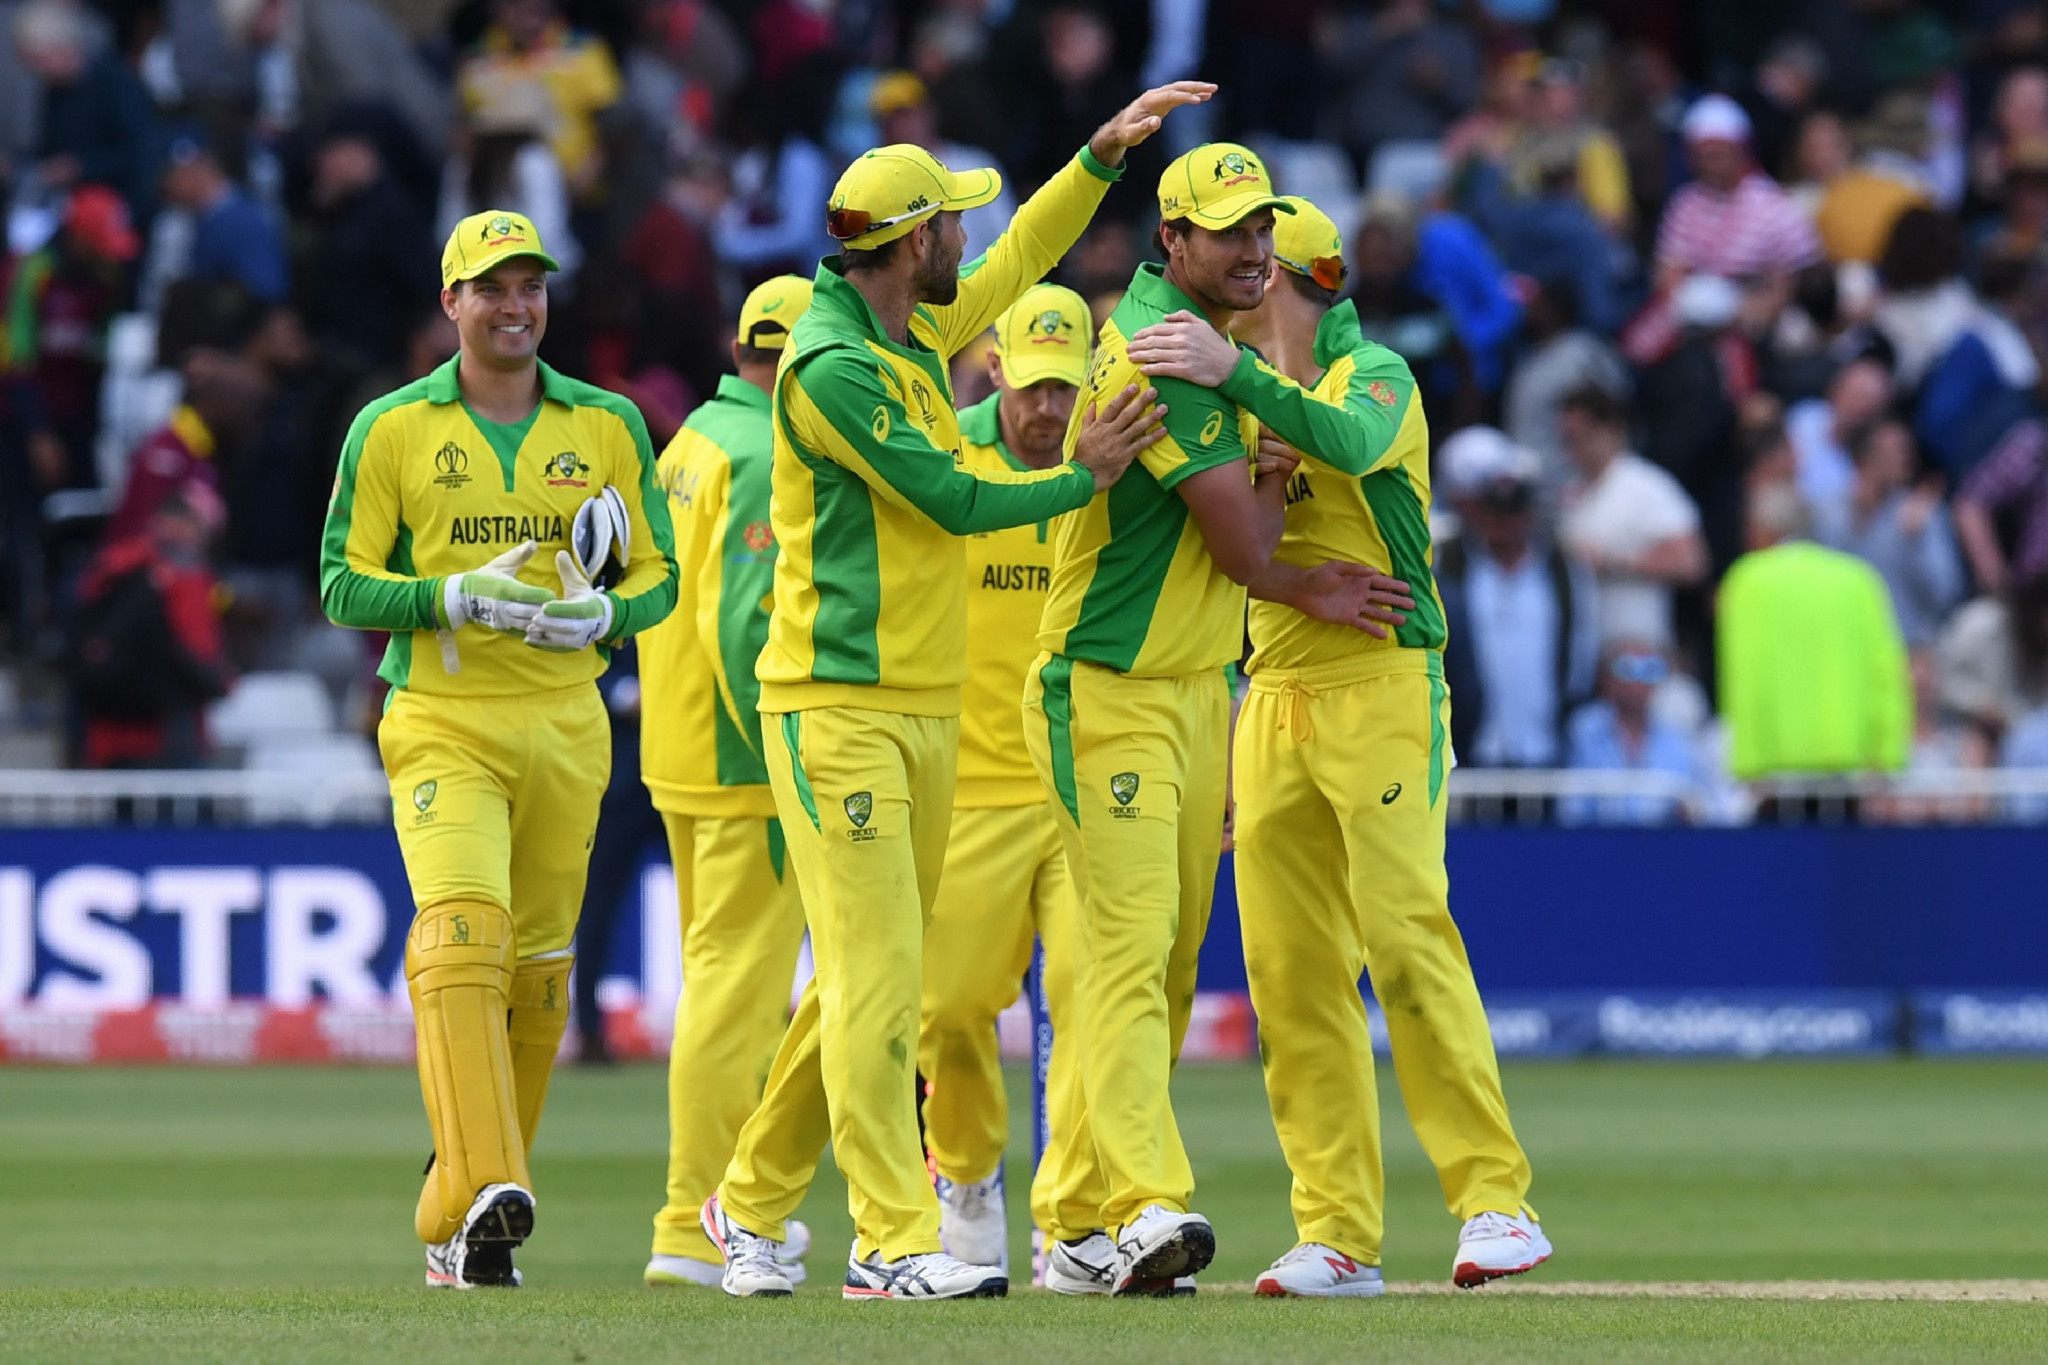 Australia recover from poor start to beat West Indies at Cricket World Cup 